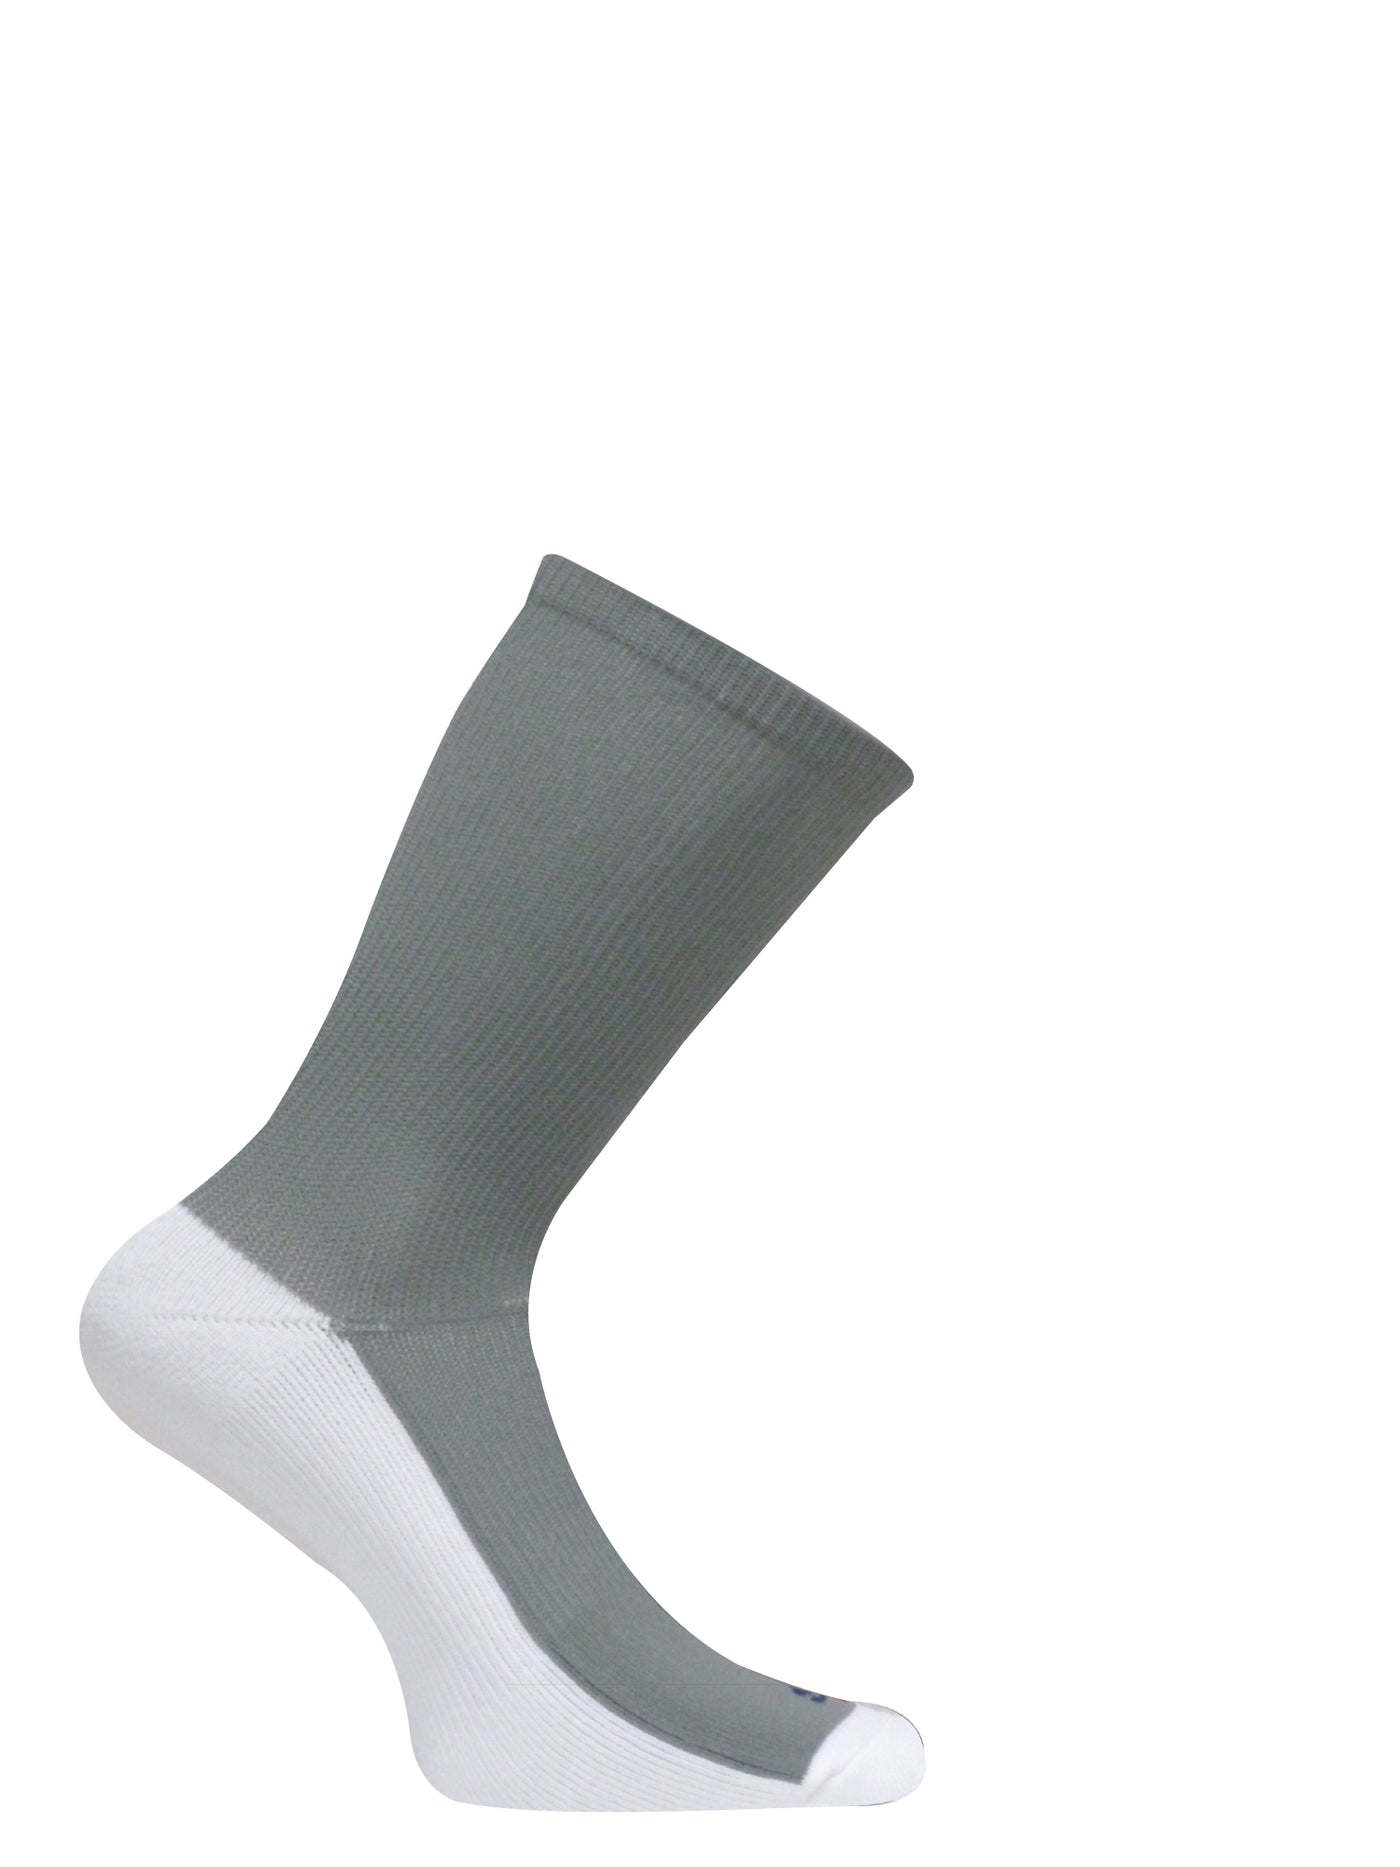 DIABETIC CREW FOOT AND ANKLE SUPPORT - SS5011 - Gray